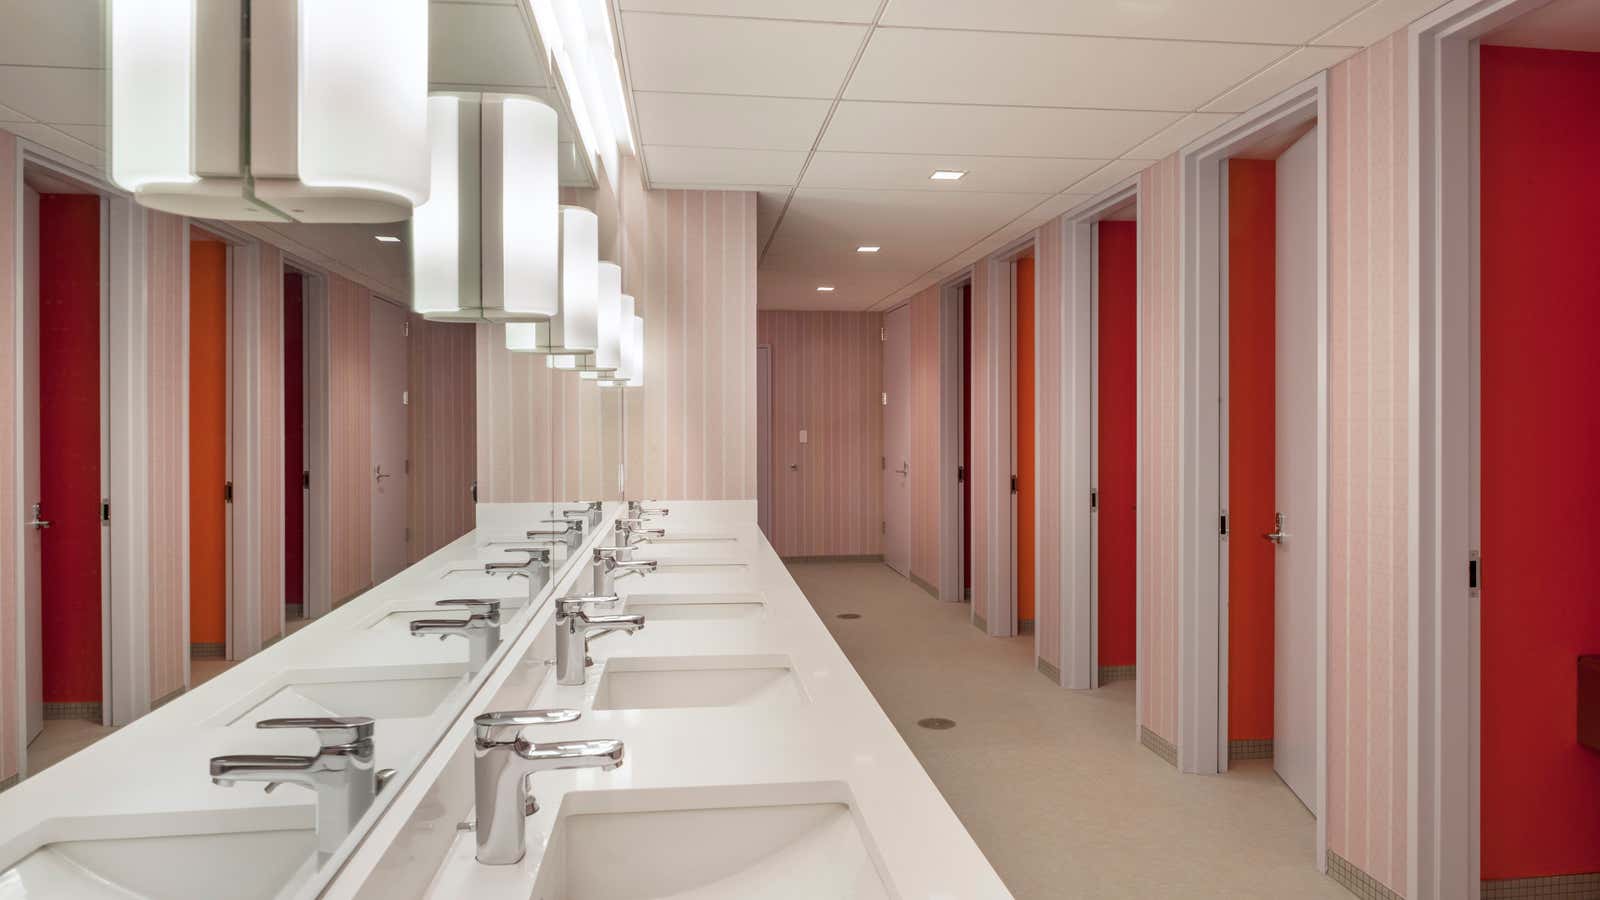 Gender-inclusive bathrooms at Congregation Beit Simchat Torah in New York City, designed by the Architecture Research Office.